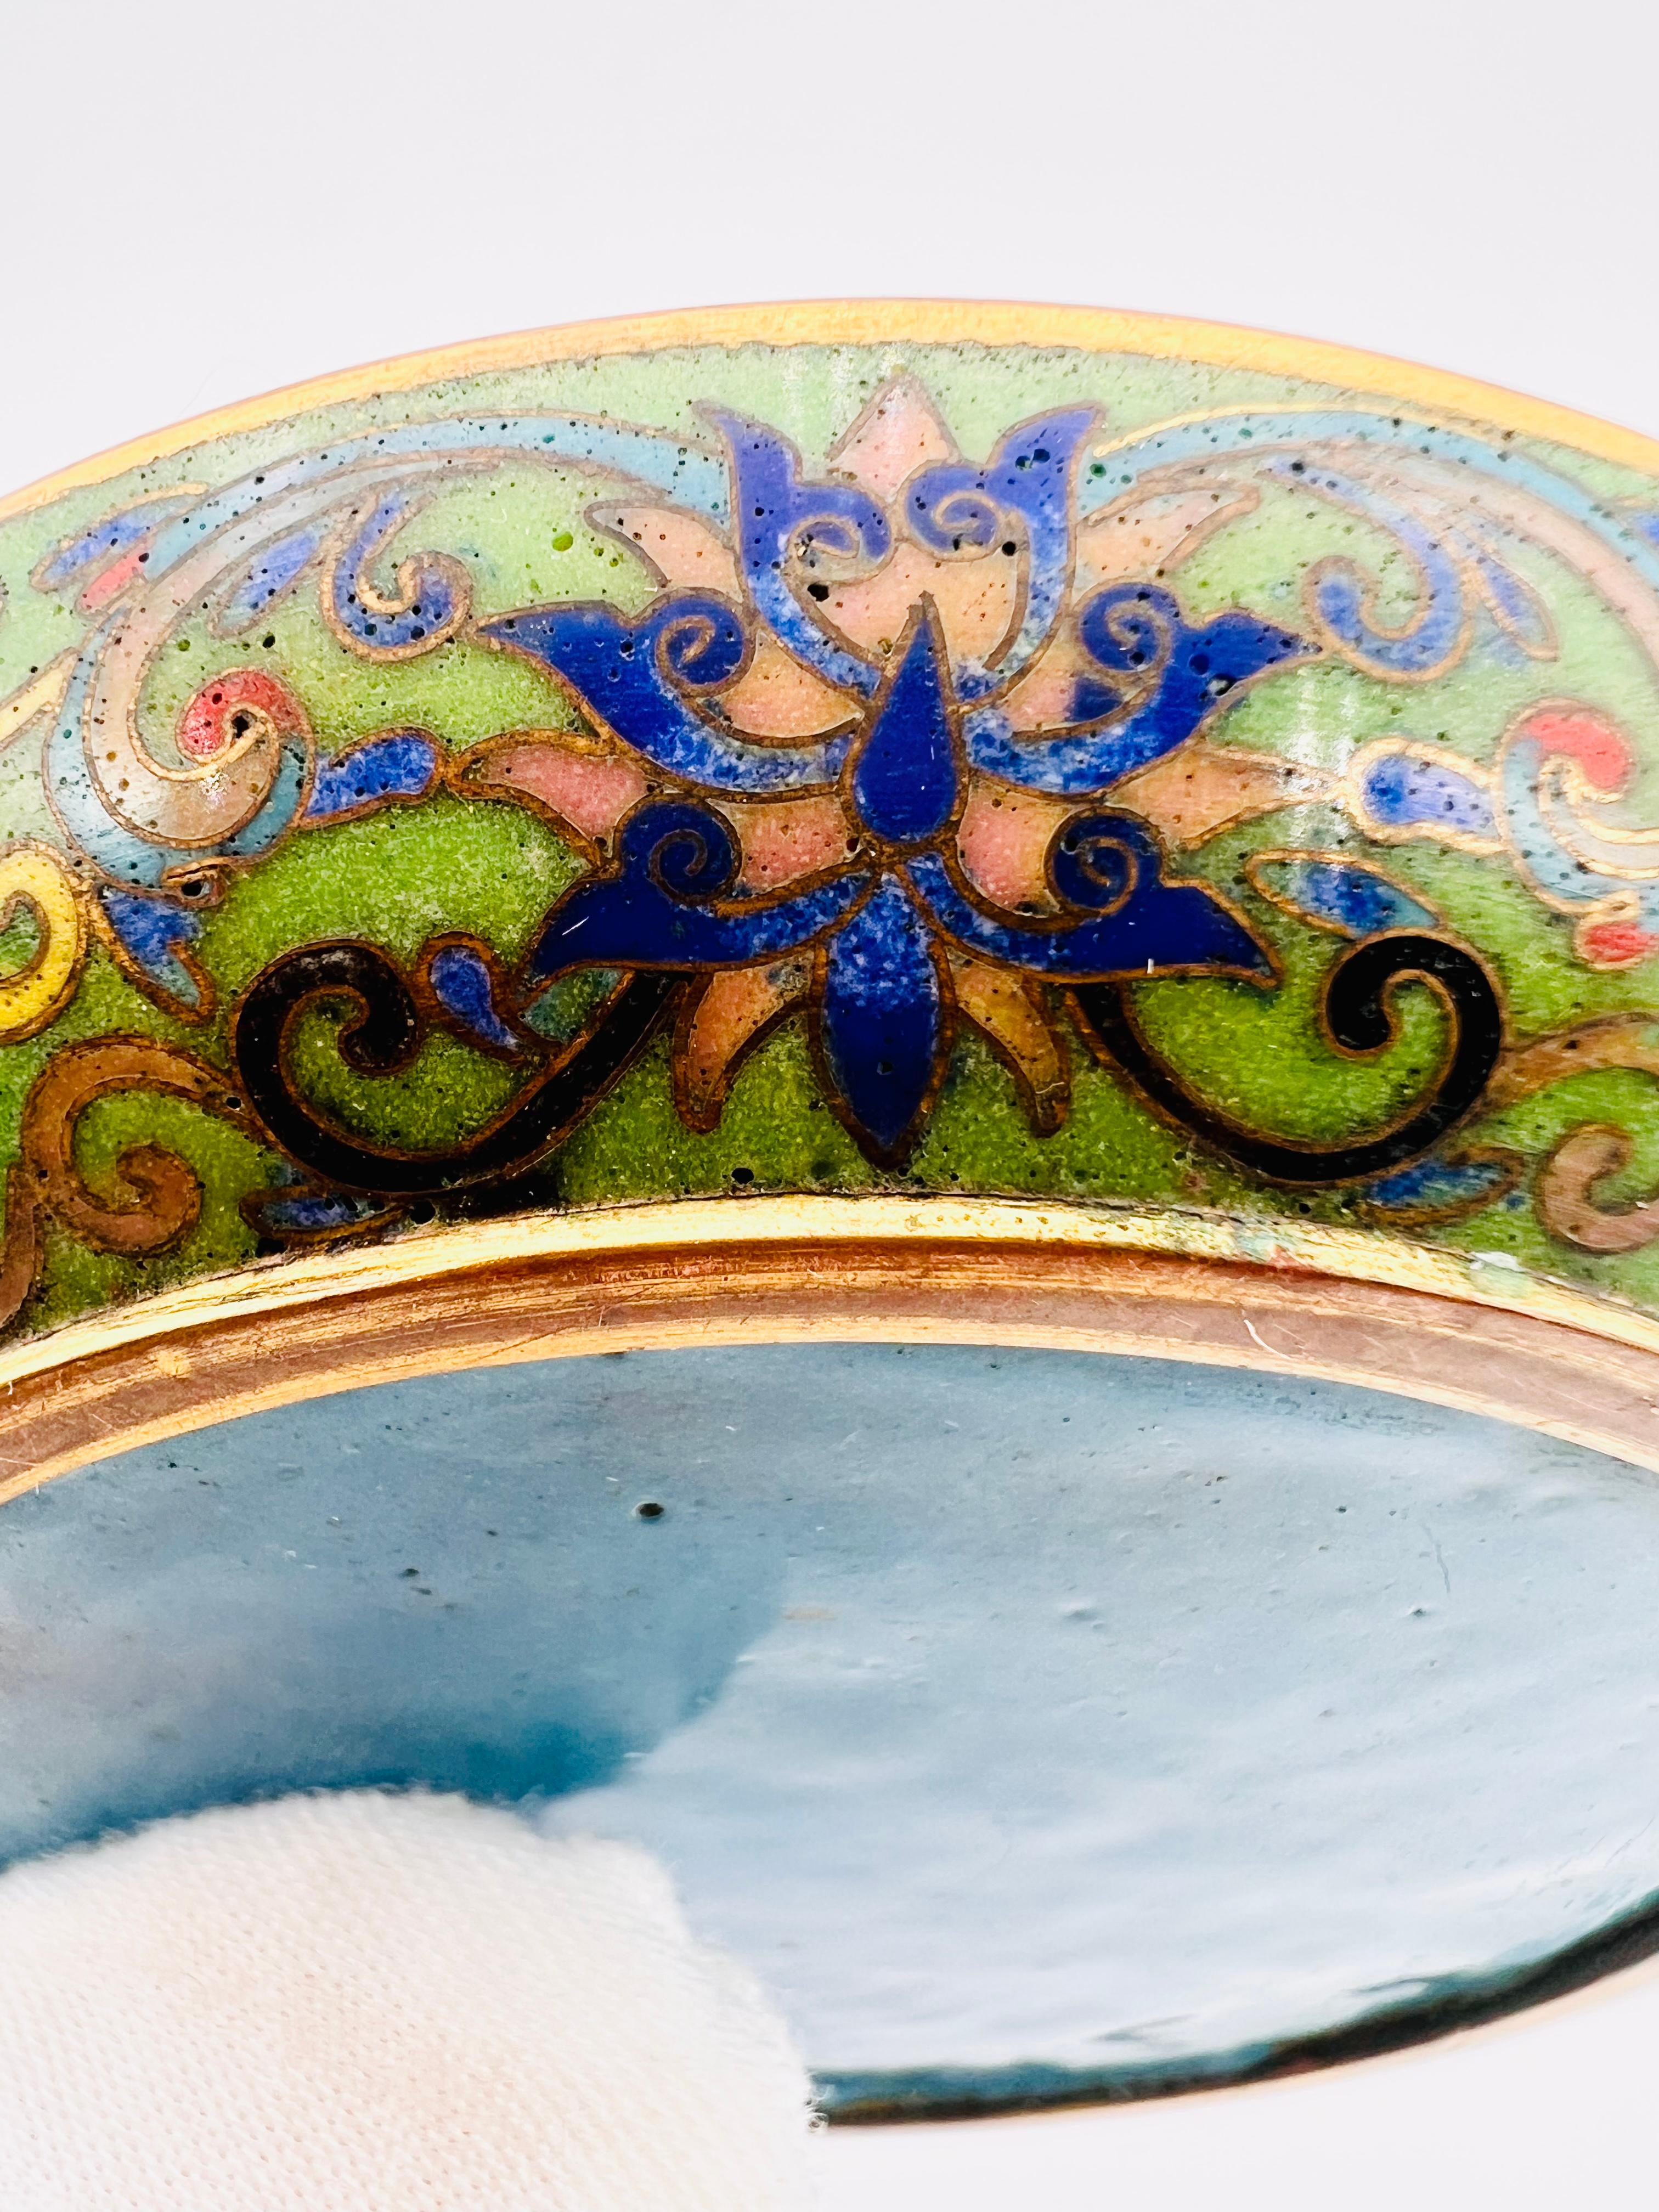 Fine Chinese Cloisonne Enamel Plate / Dish / Tray, 19th Century For Sale 7